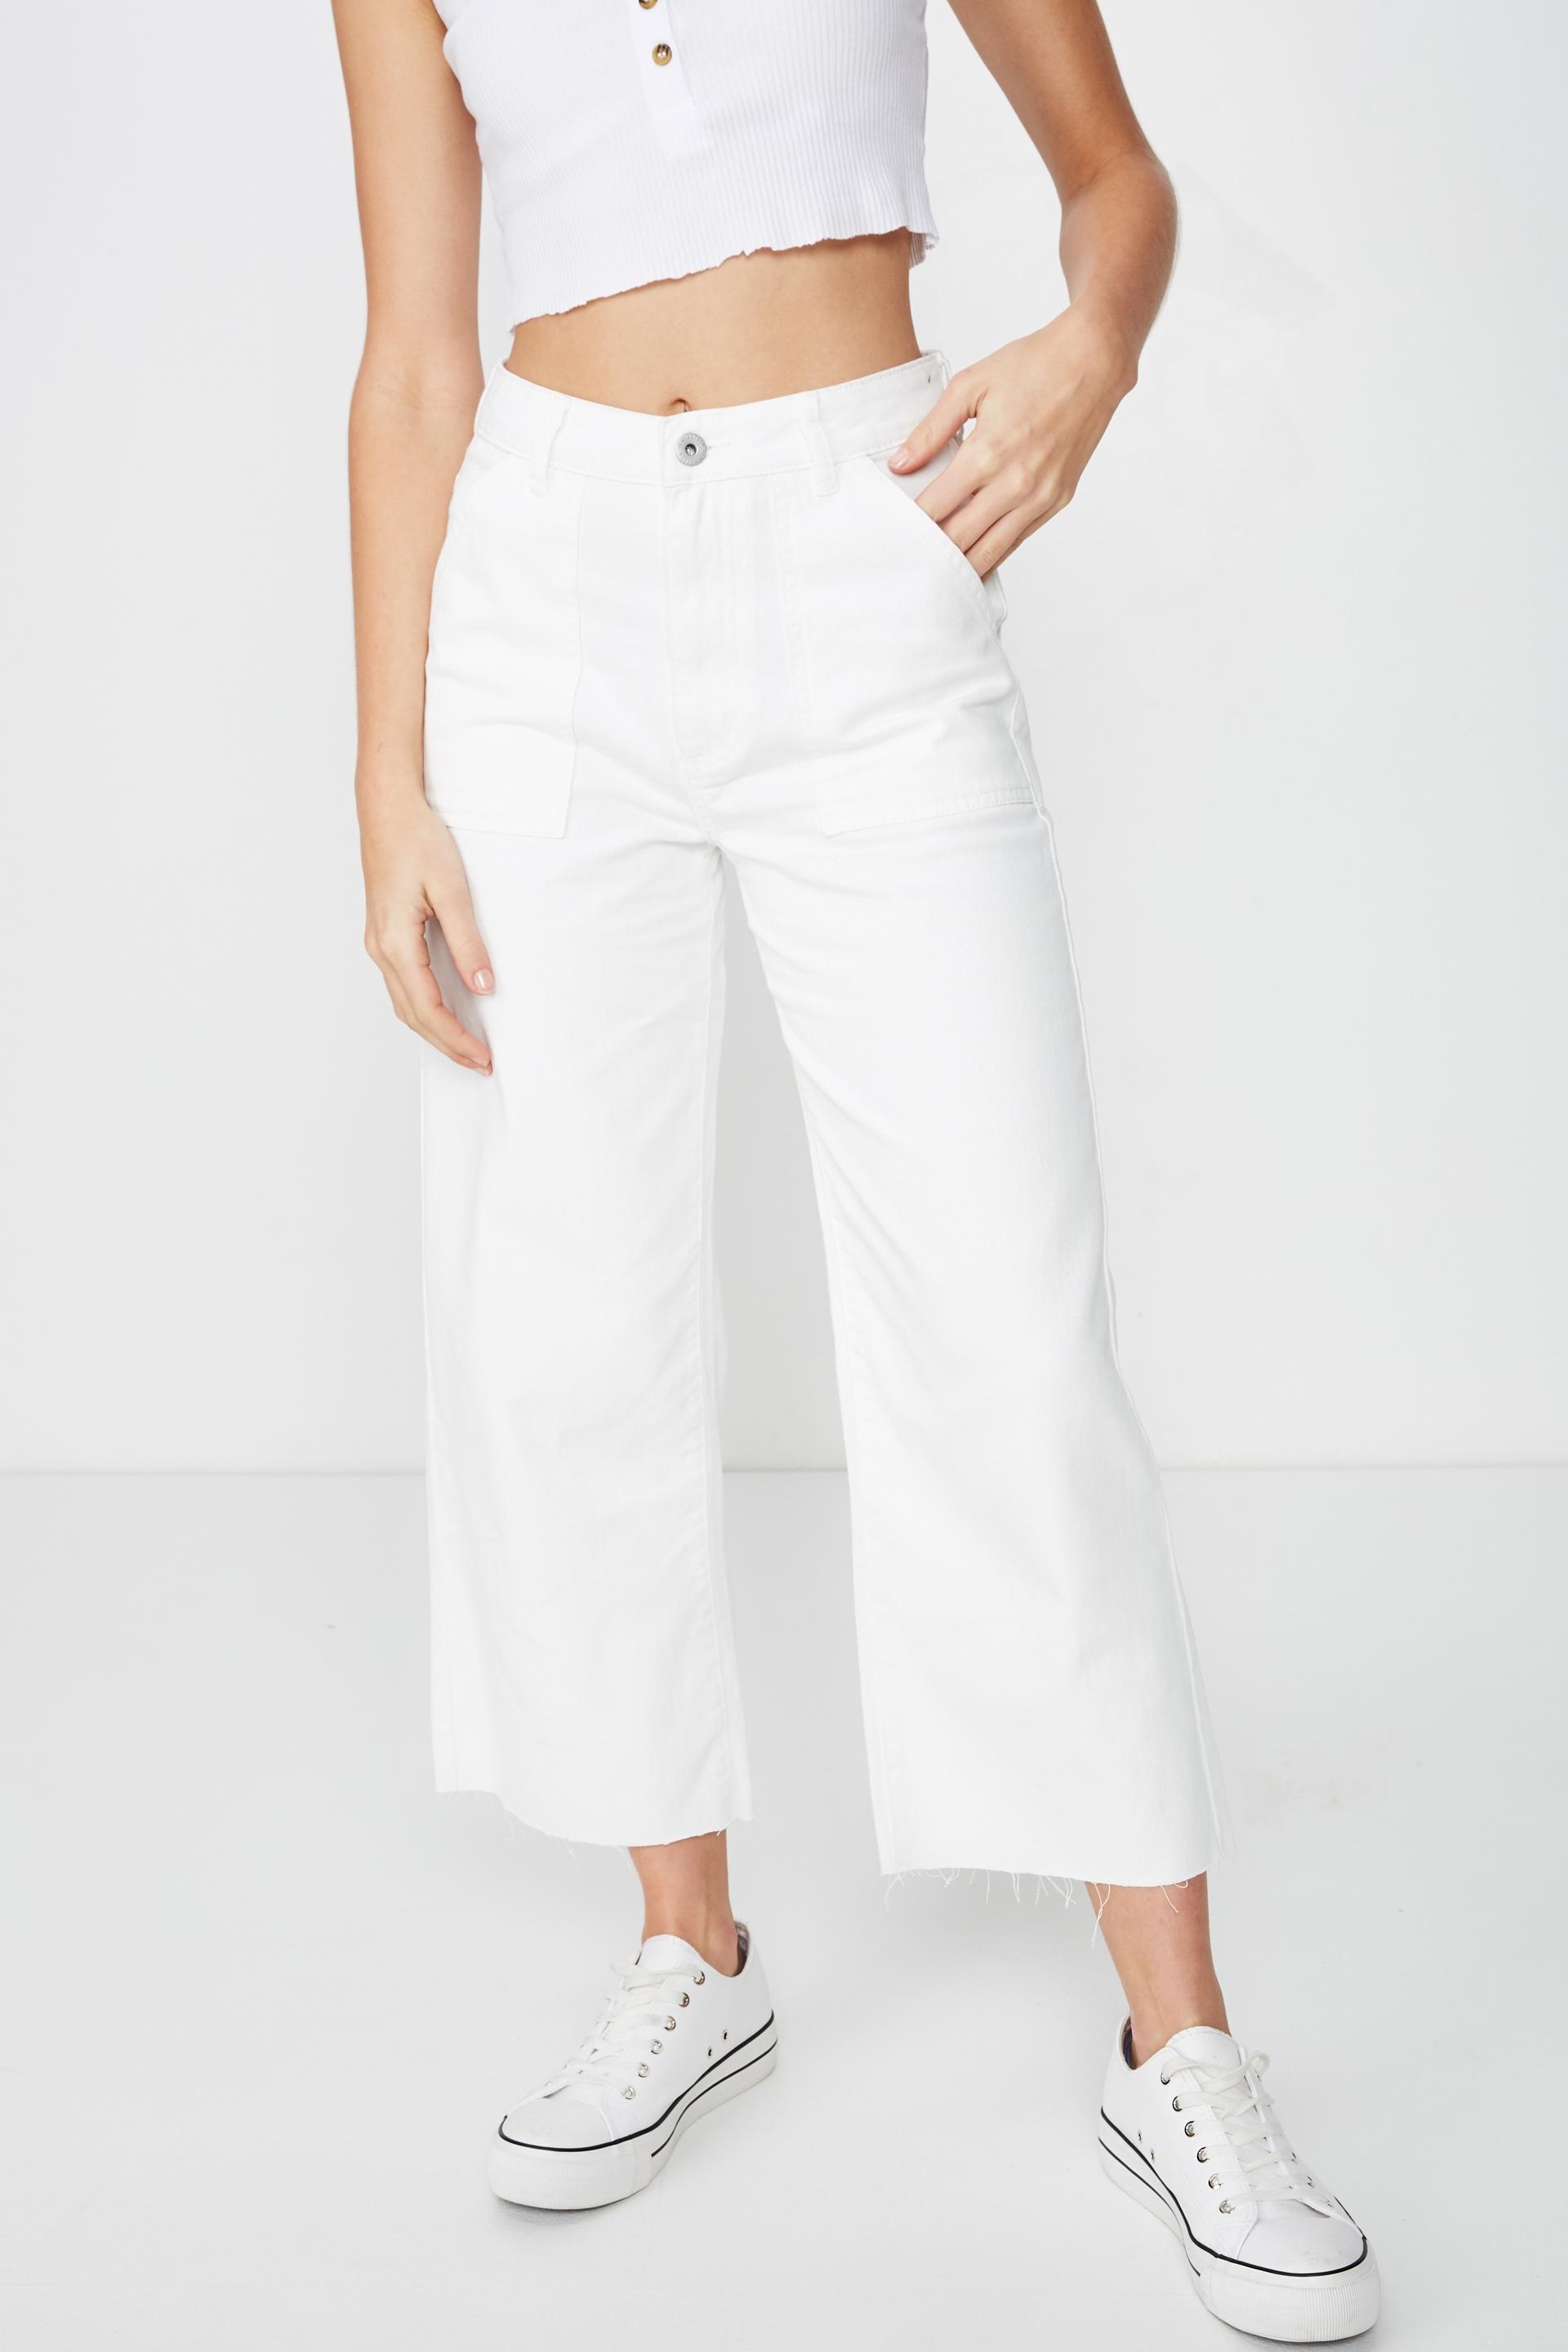 Wide leg cropped jeans - white Cotton On Jeans | Superbalist.com